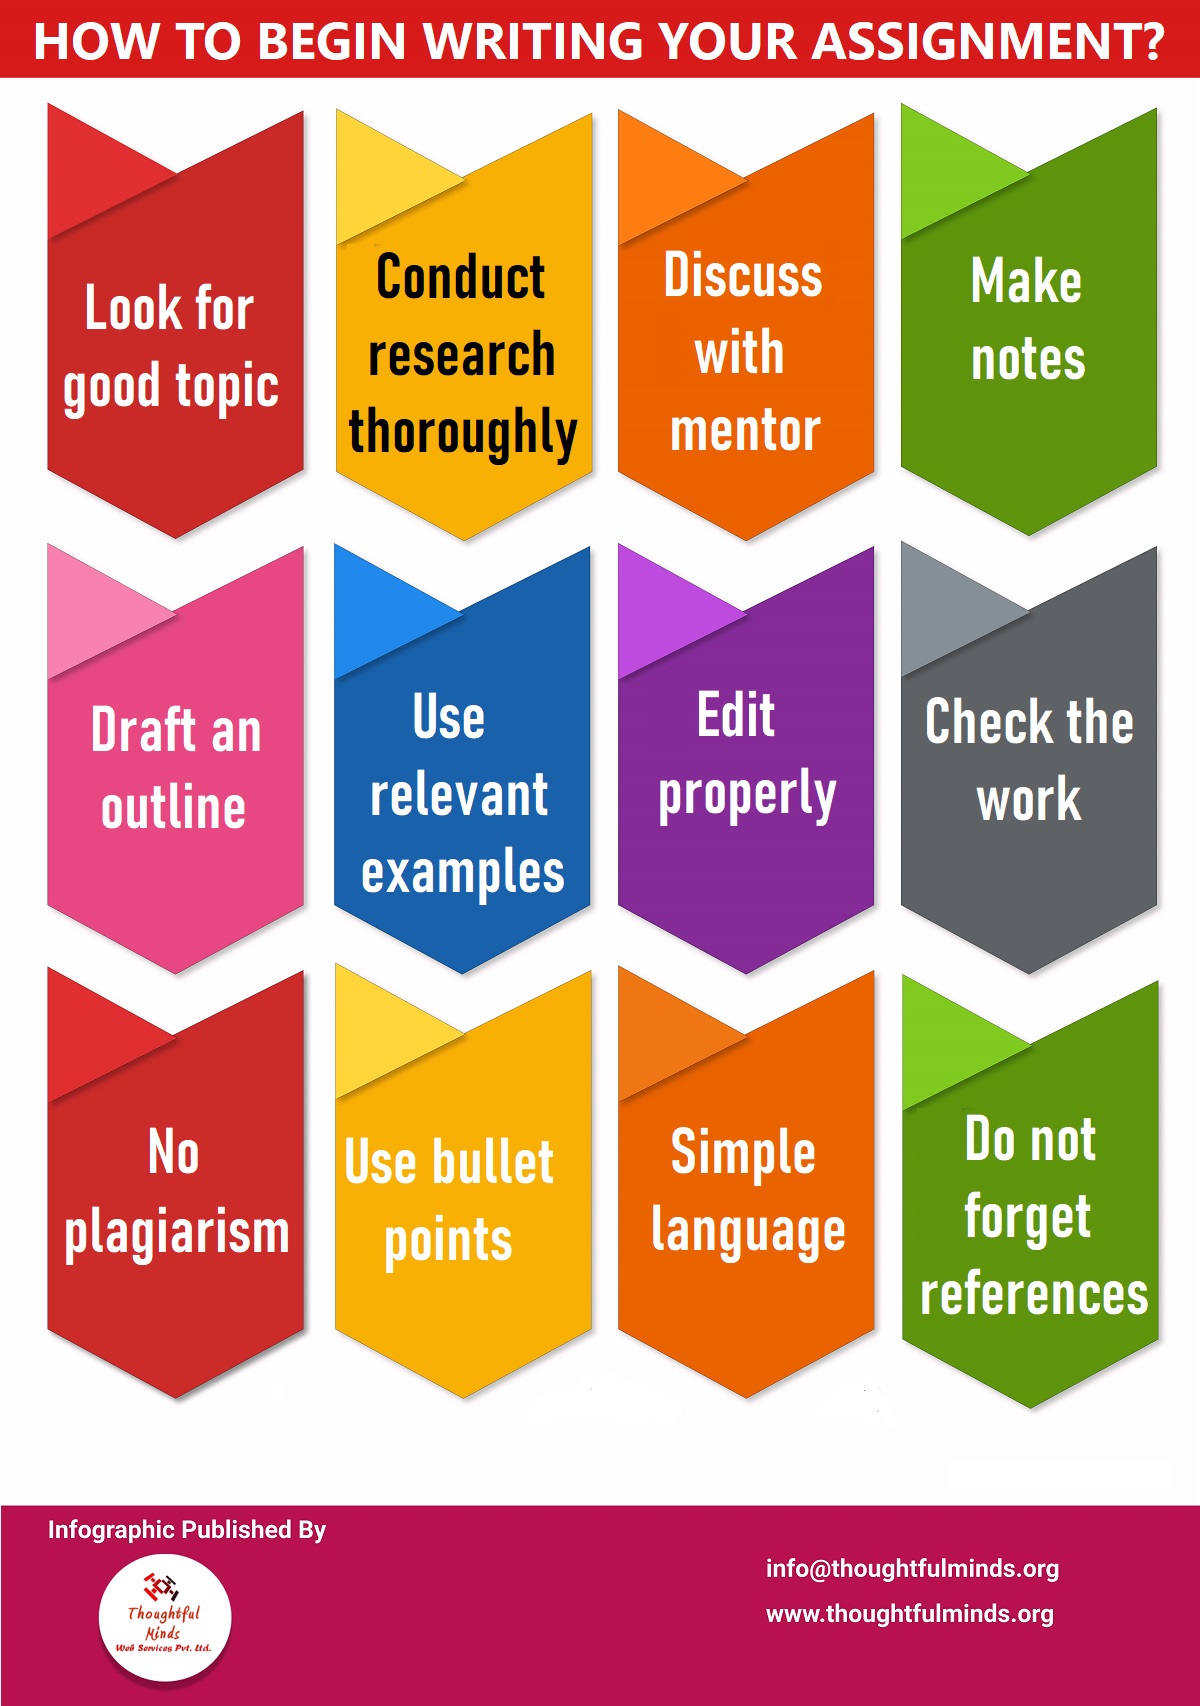 Infographic On How To Begin Your Assignment - ThoughtfulMinds